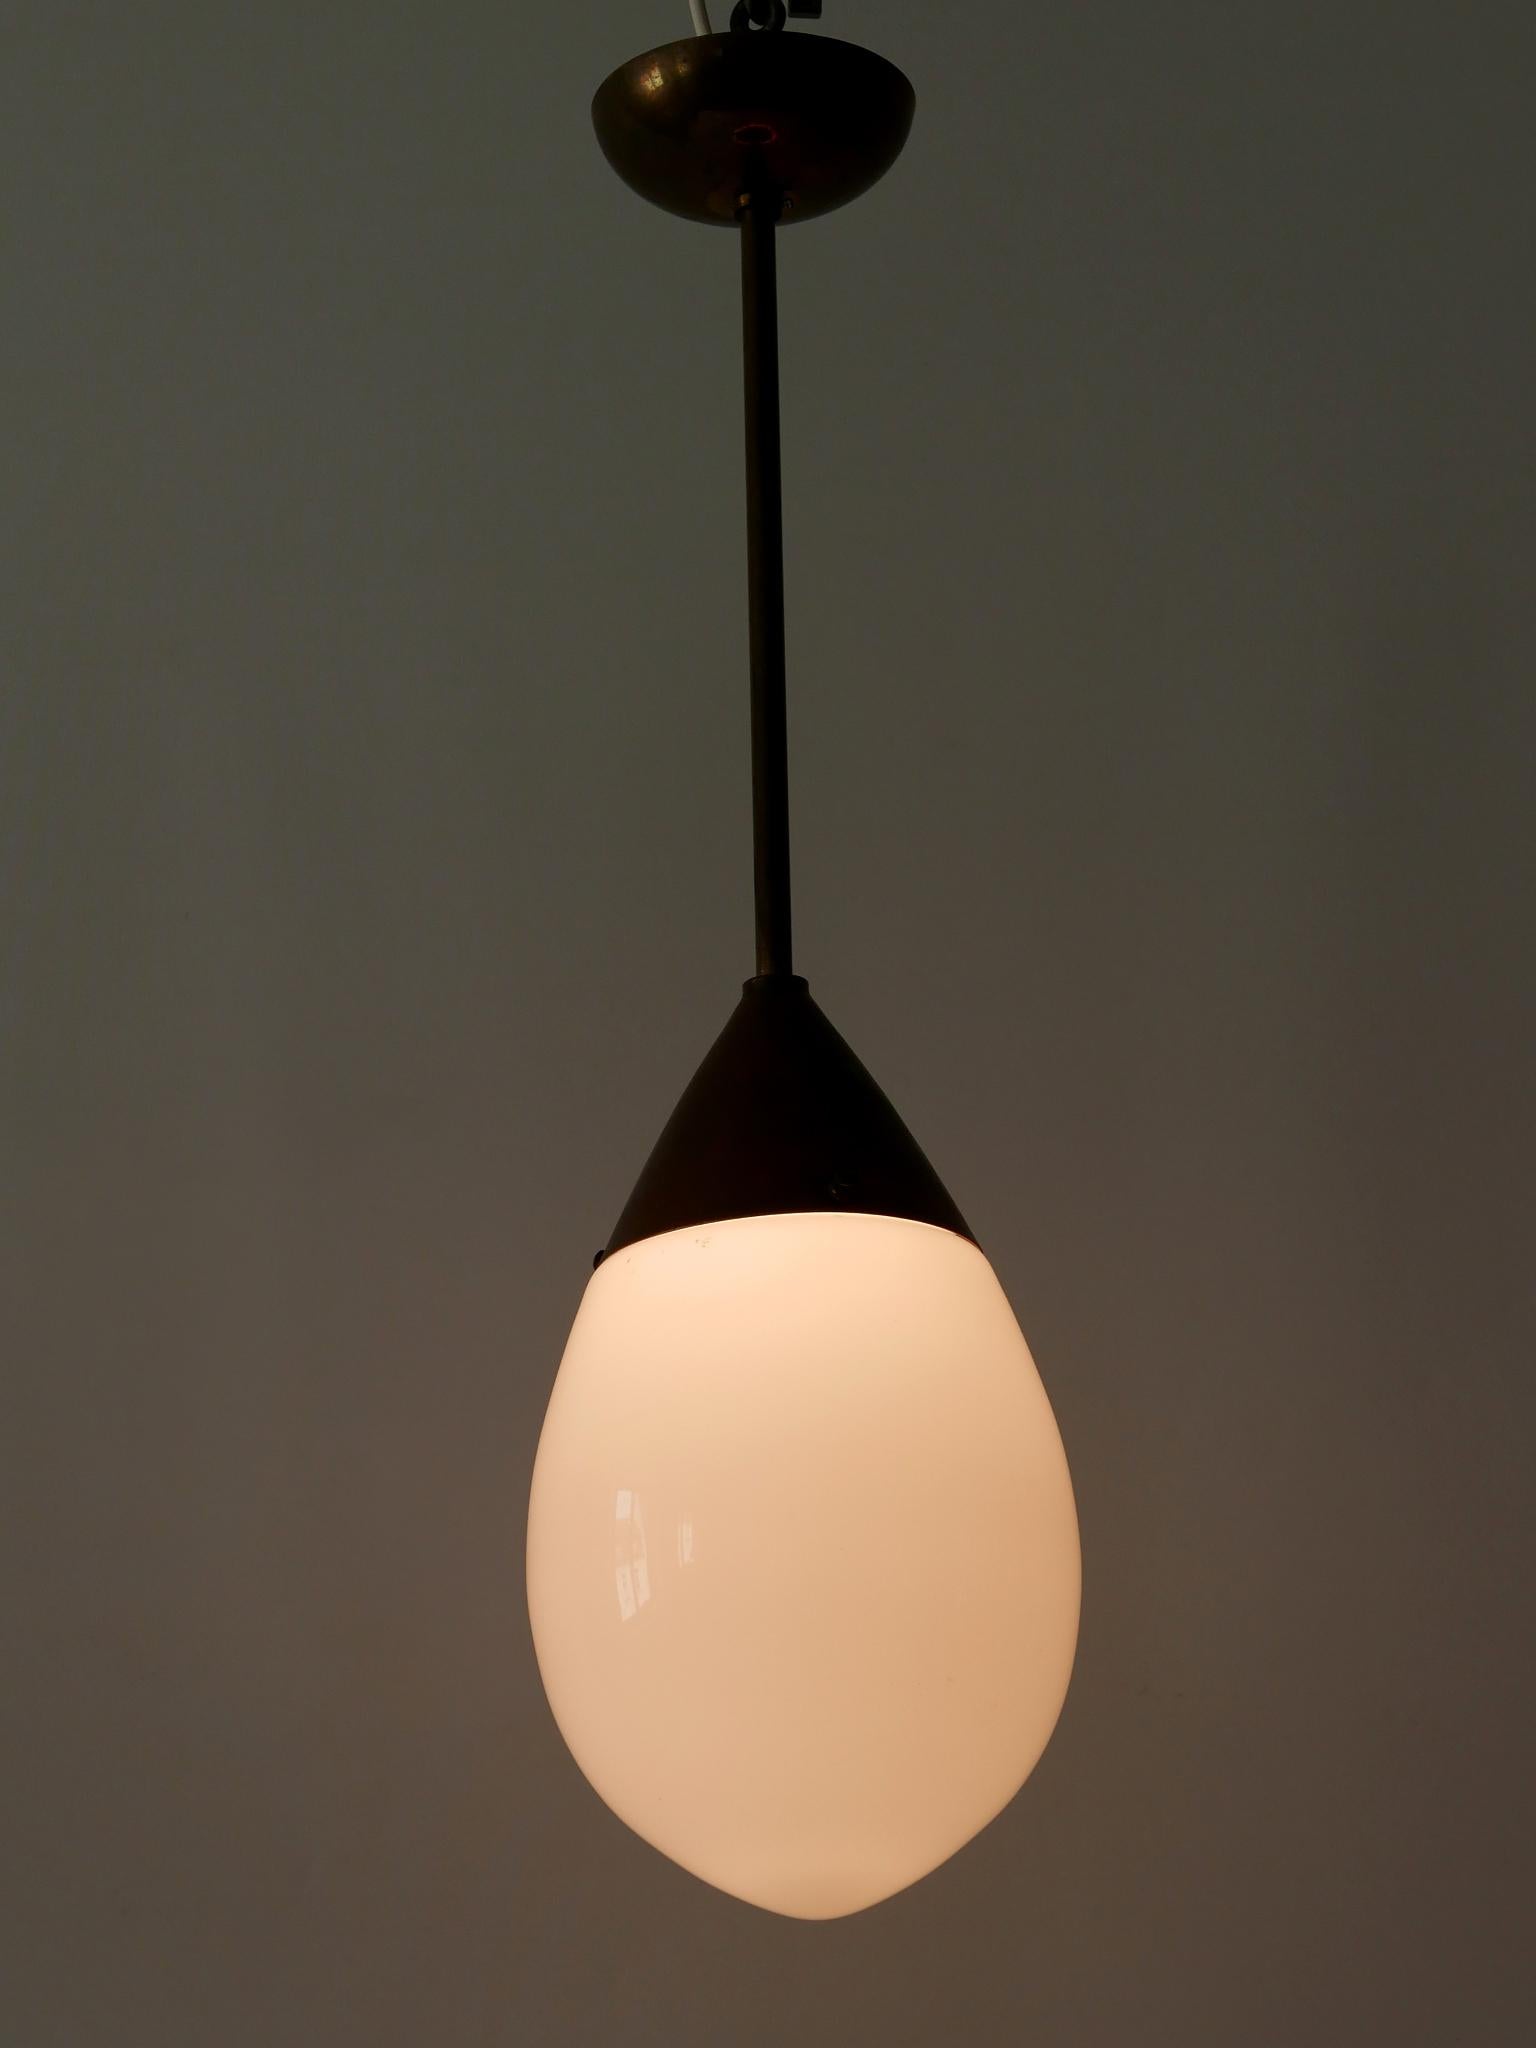 Exceptional Bauhaus Pendant Lamp or Hanging Light Drop by Siemens 1920s, Germany For Sale 5